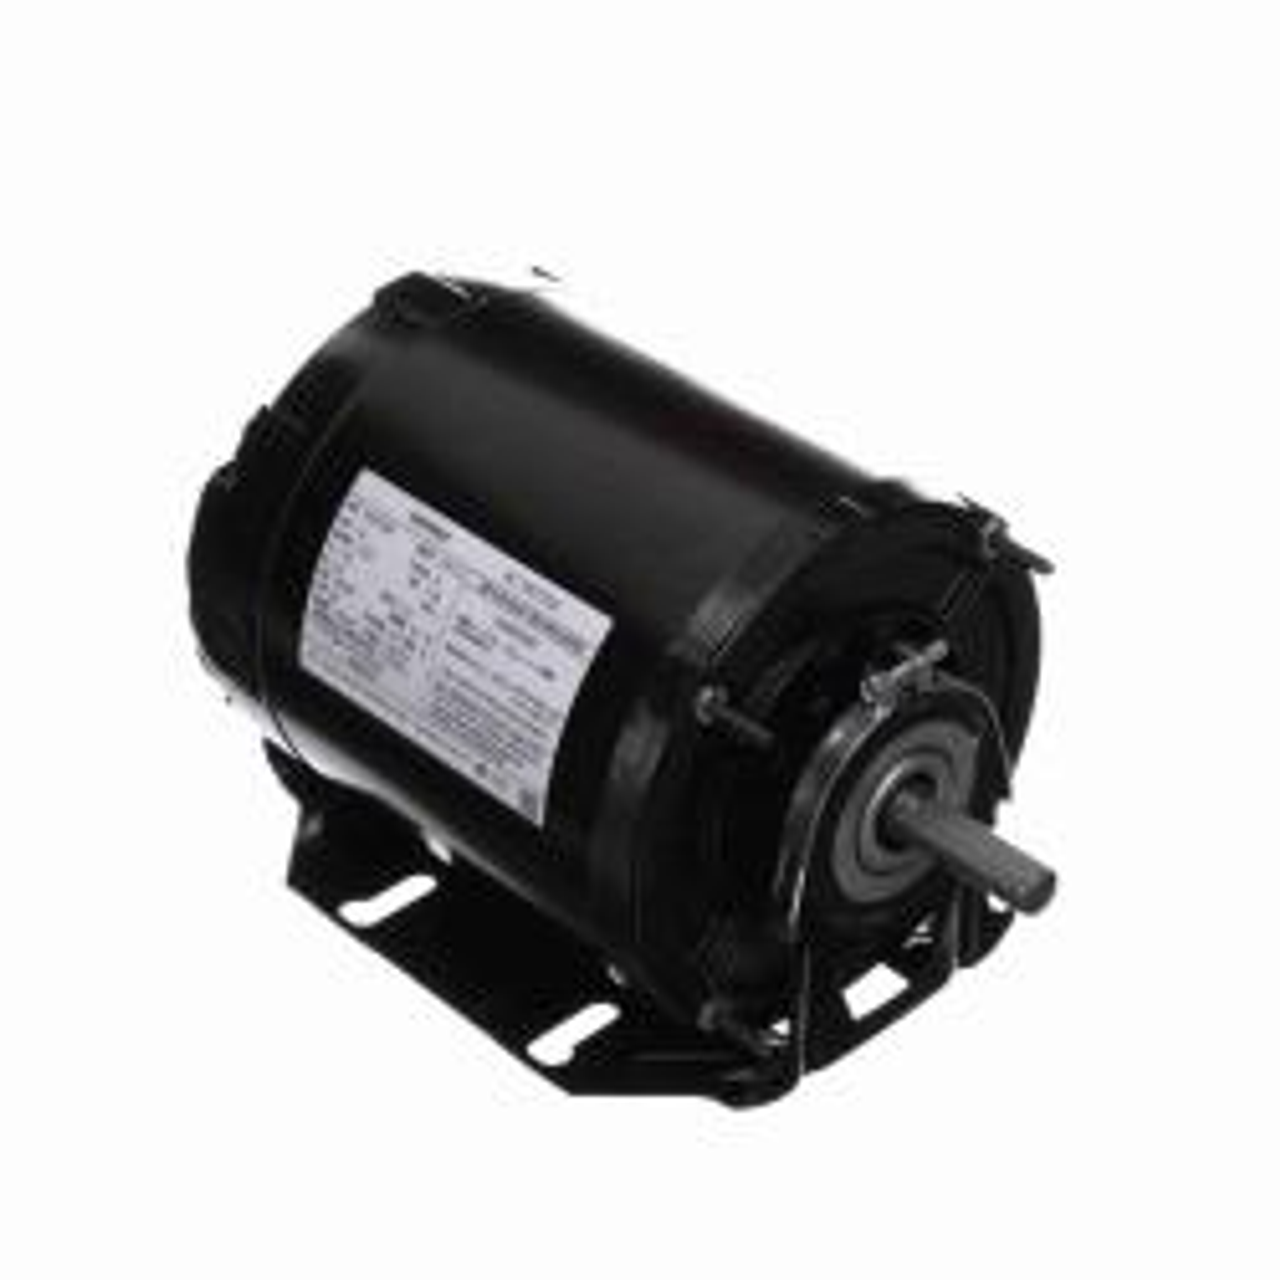 RB2024 CENTURY FAN AND BLOWER MOTOR 1/4 HP 1800 RPM 48 FRAME